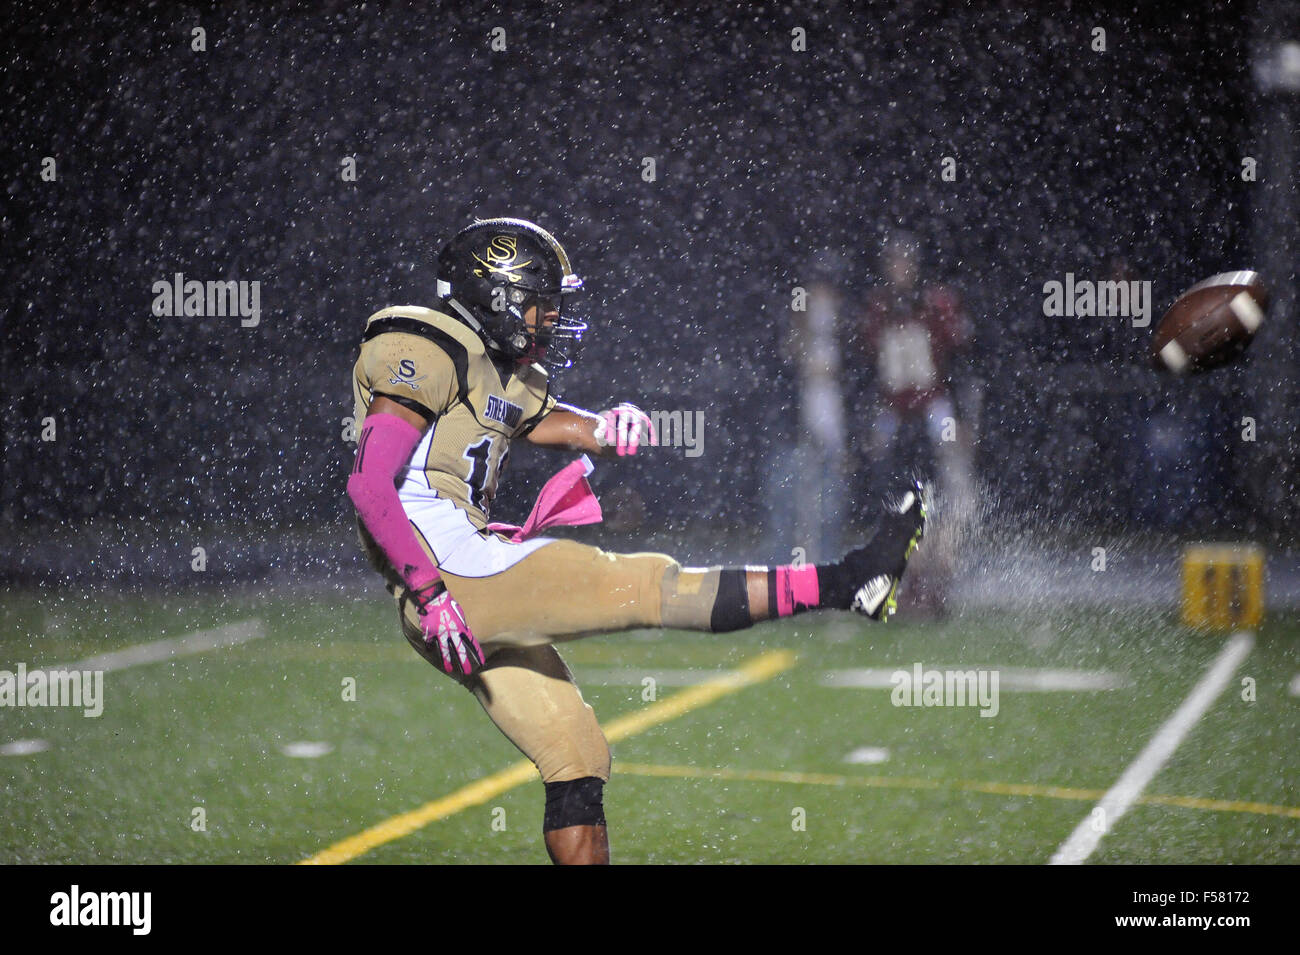 Punter having a significant challenge in kicking  the football due to very wet and windy game conditions. USA. Stock Photo